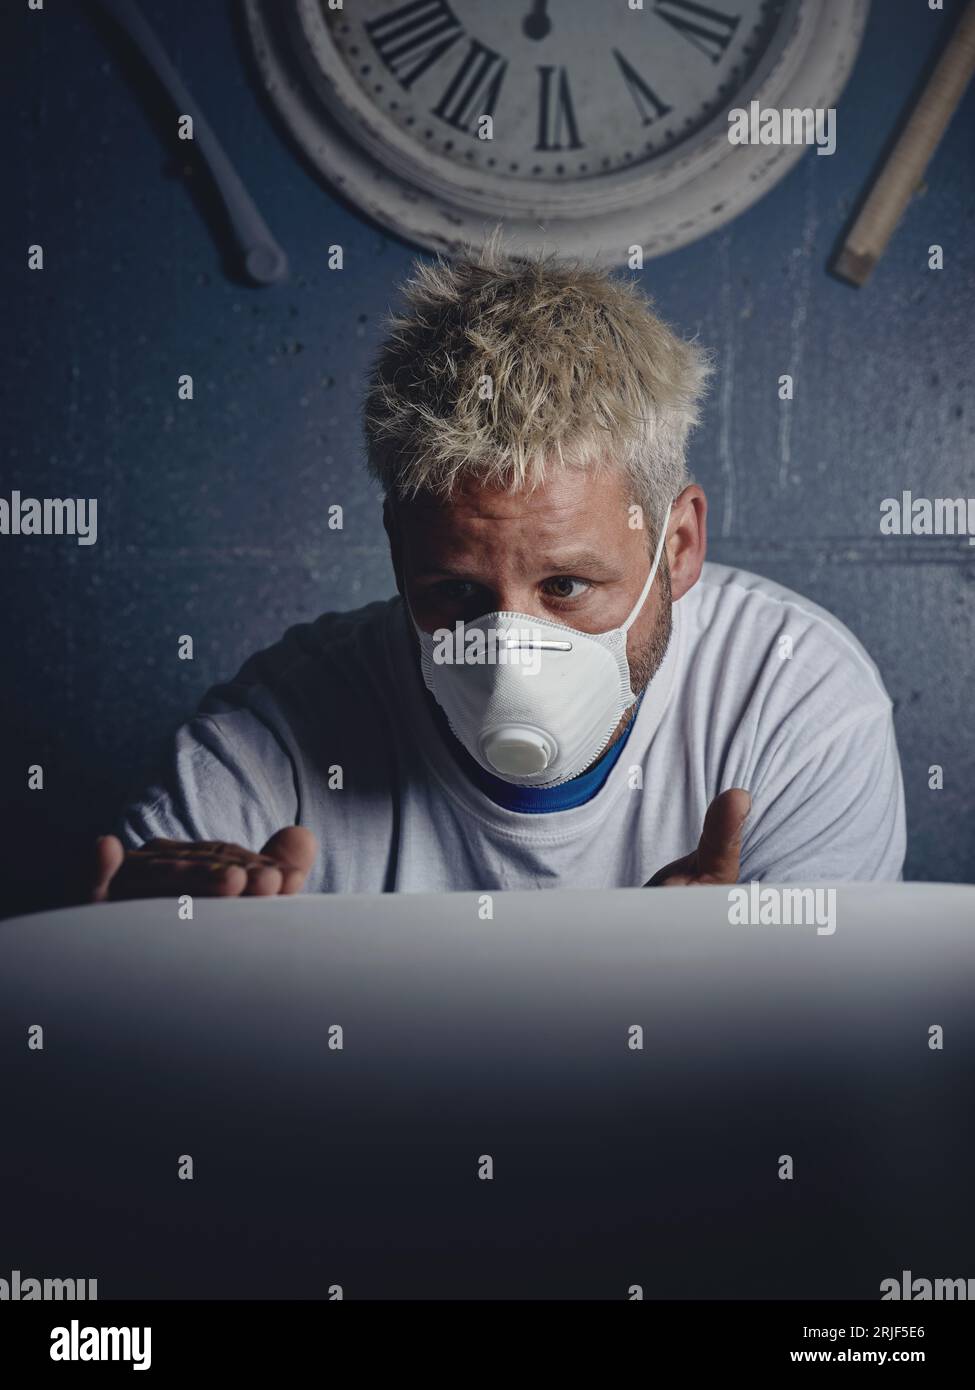 Serious concentrated blond haired male master making and checking white surfboard while observing and touching it in workshop Stock Photo